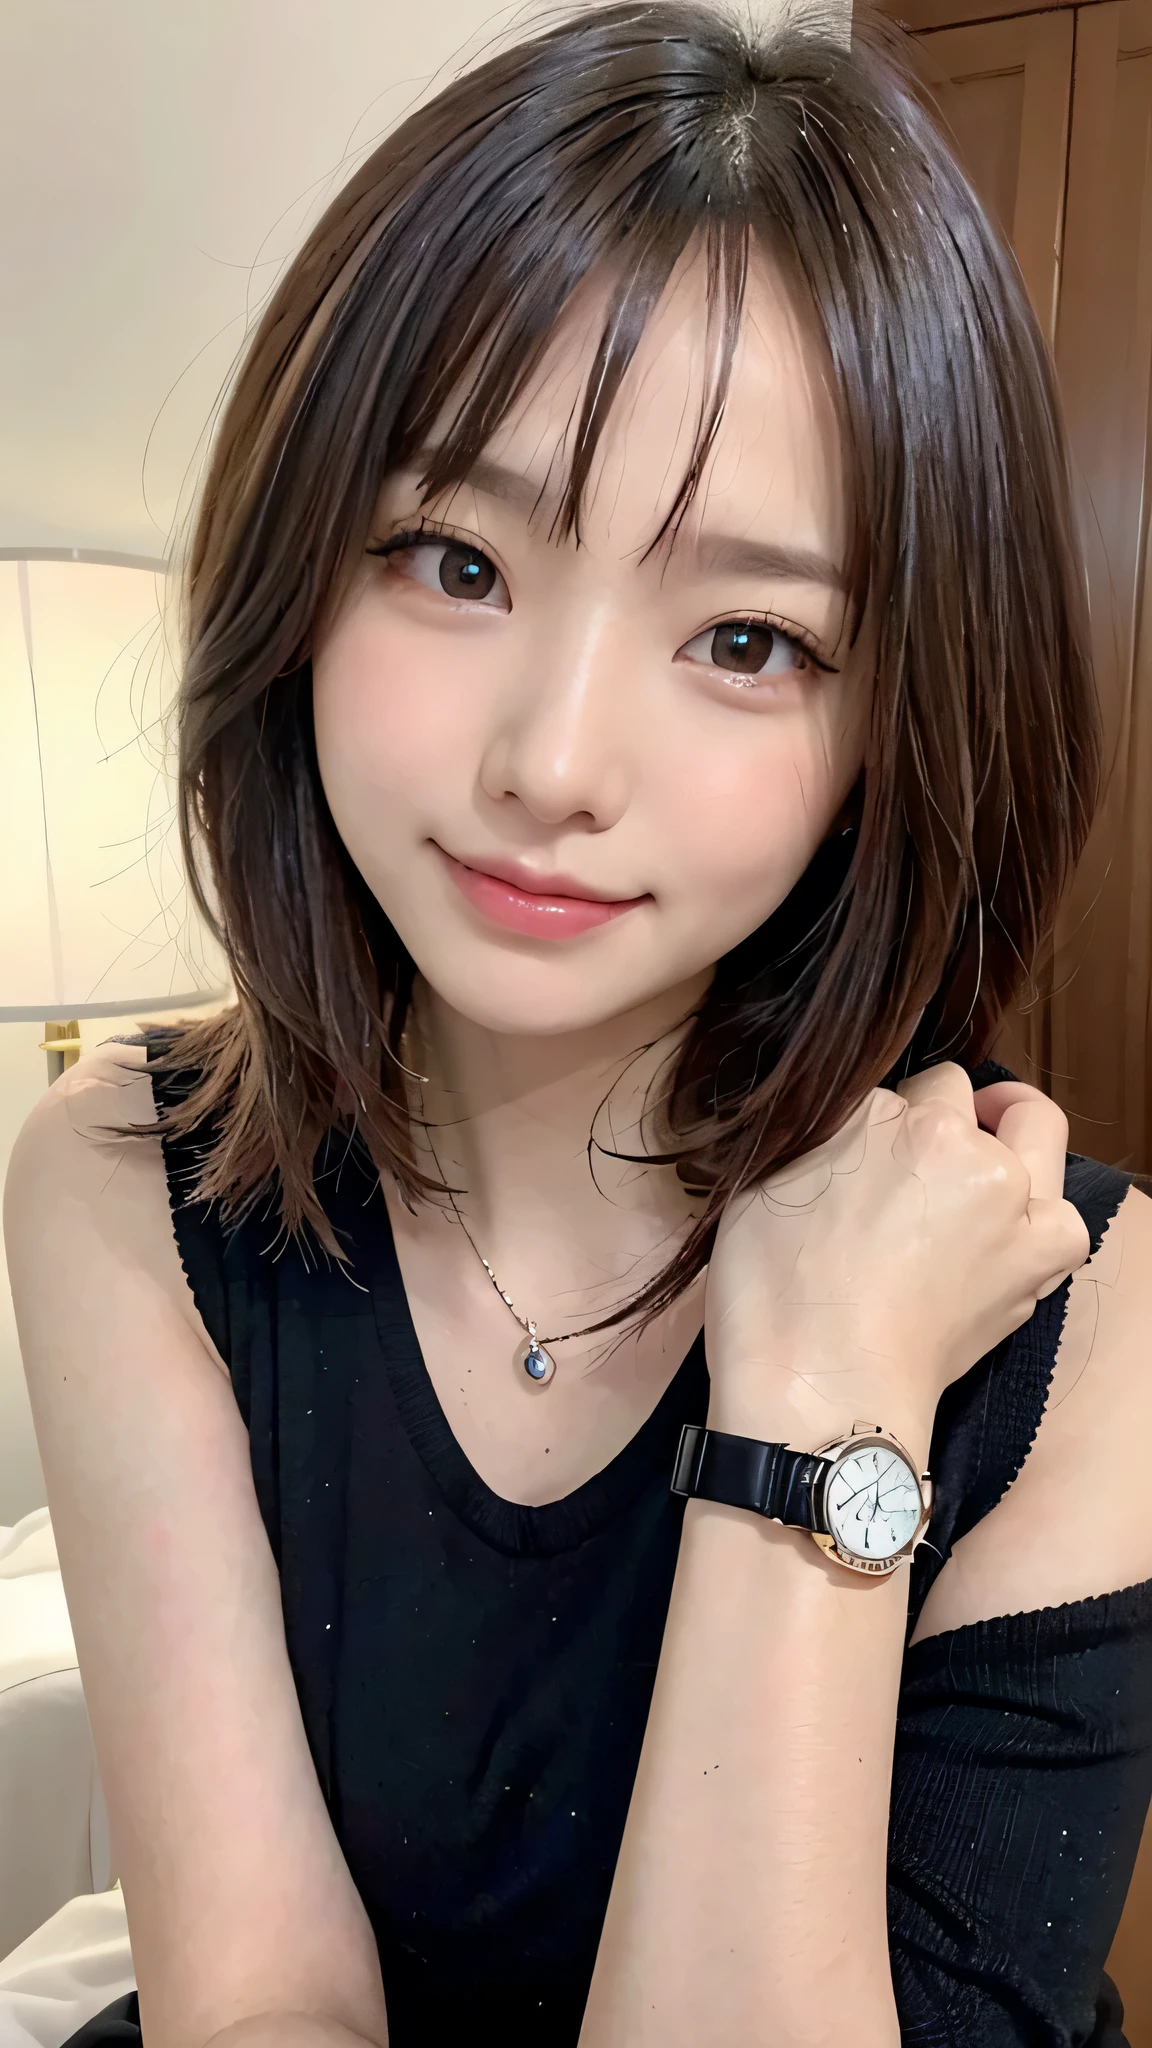 Close-up of a woman with a watch on her wrist, With cute, doting eyes, Cute girl - Beautiful face, Nice delicate face, Dreaming eyes, Pretty and kind eyes, Cute - Beautiful - Face, Captivating eyes, Beautiful light big eyes, sakimi chan, The elegant pose is cute, Look lovingly at the camera, Deep and attractive eyes